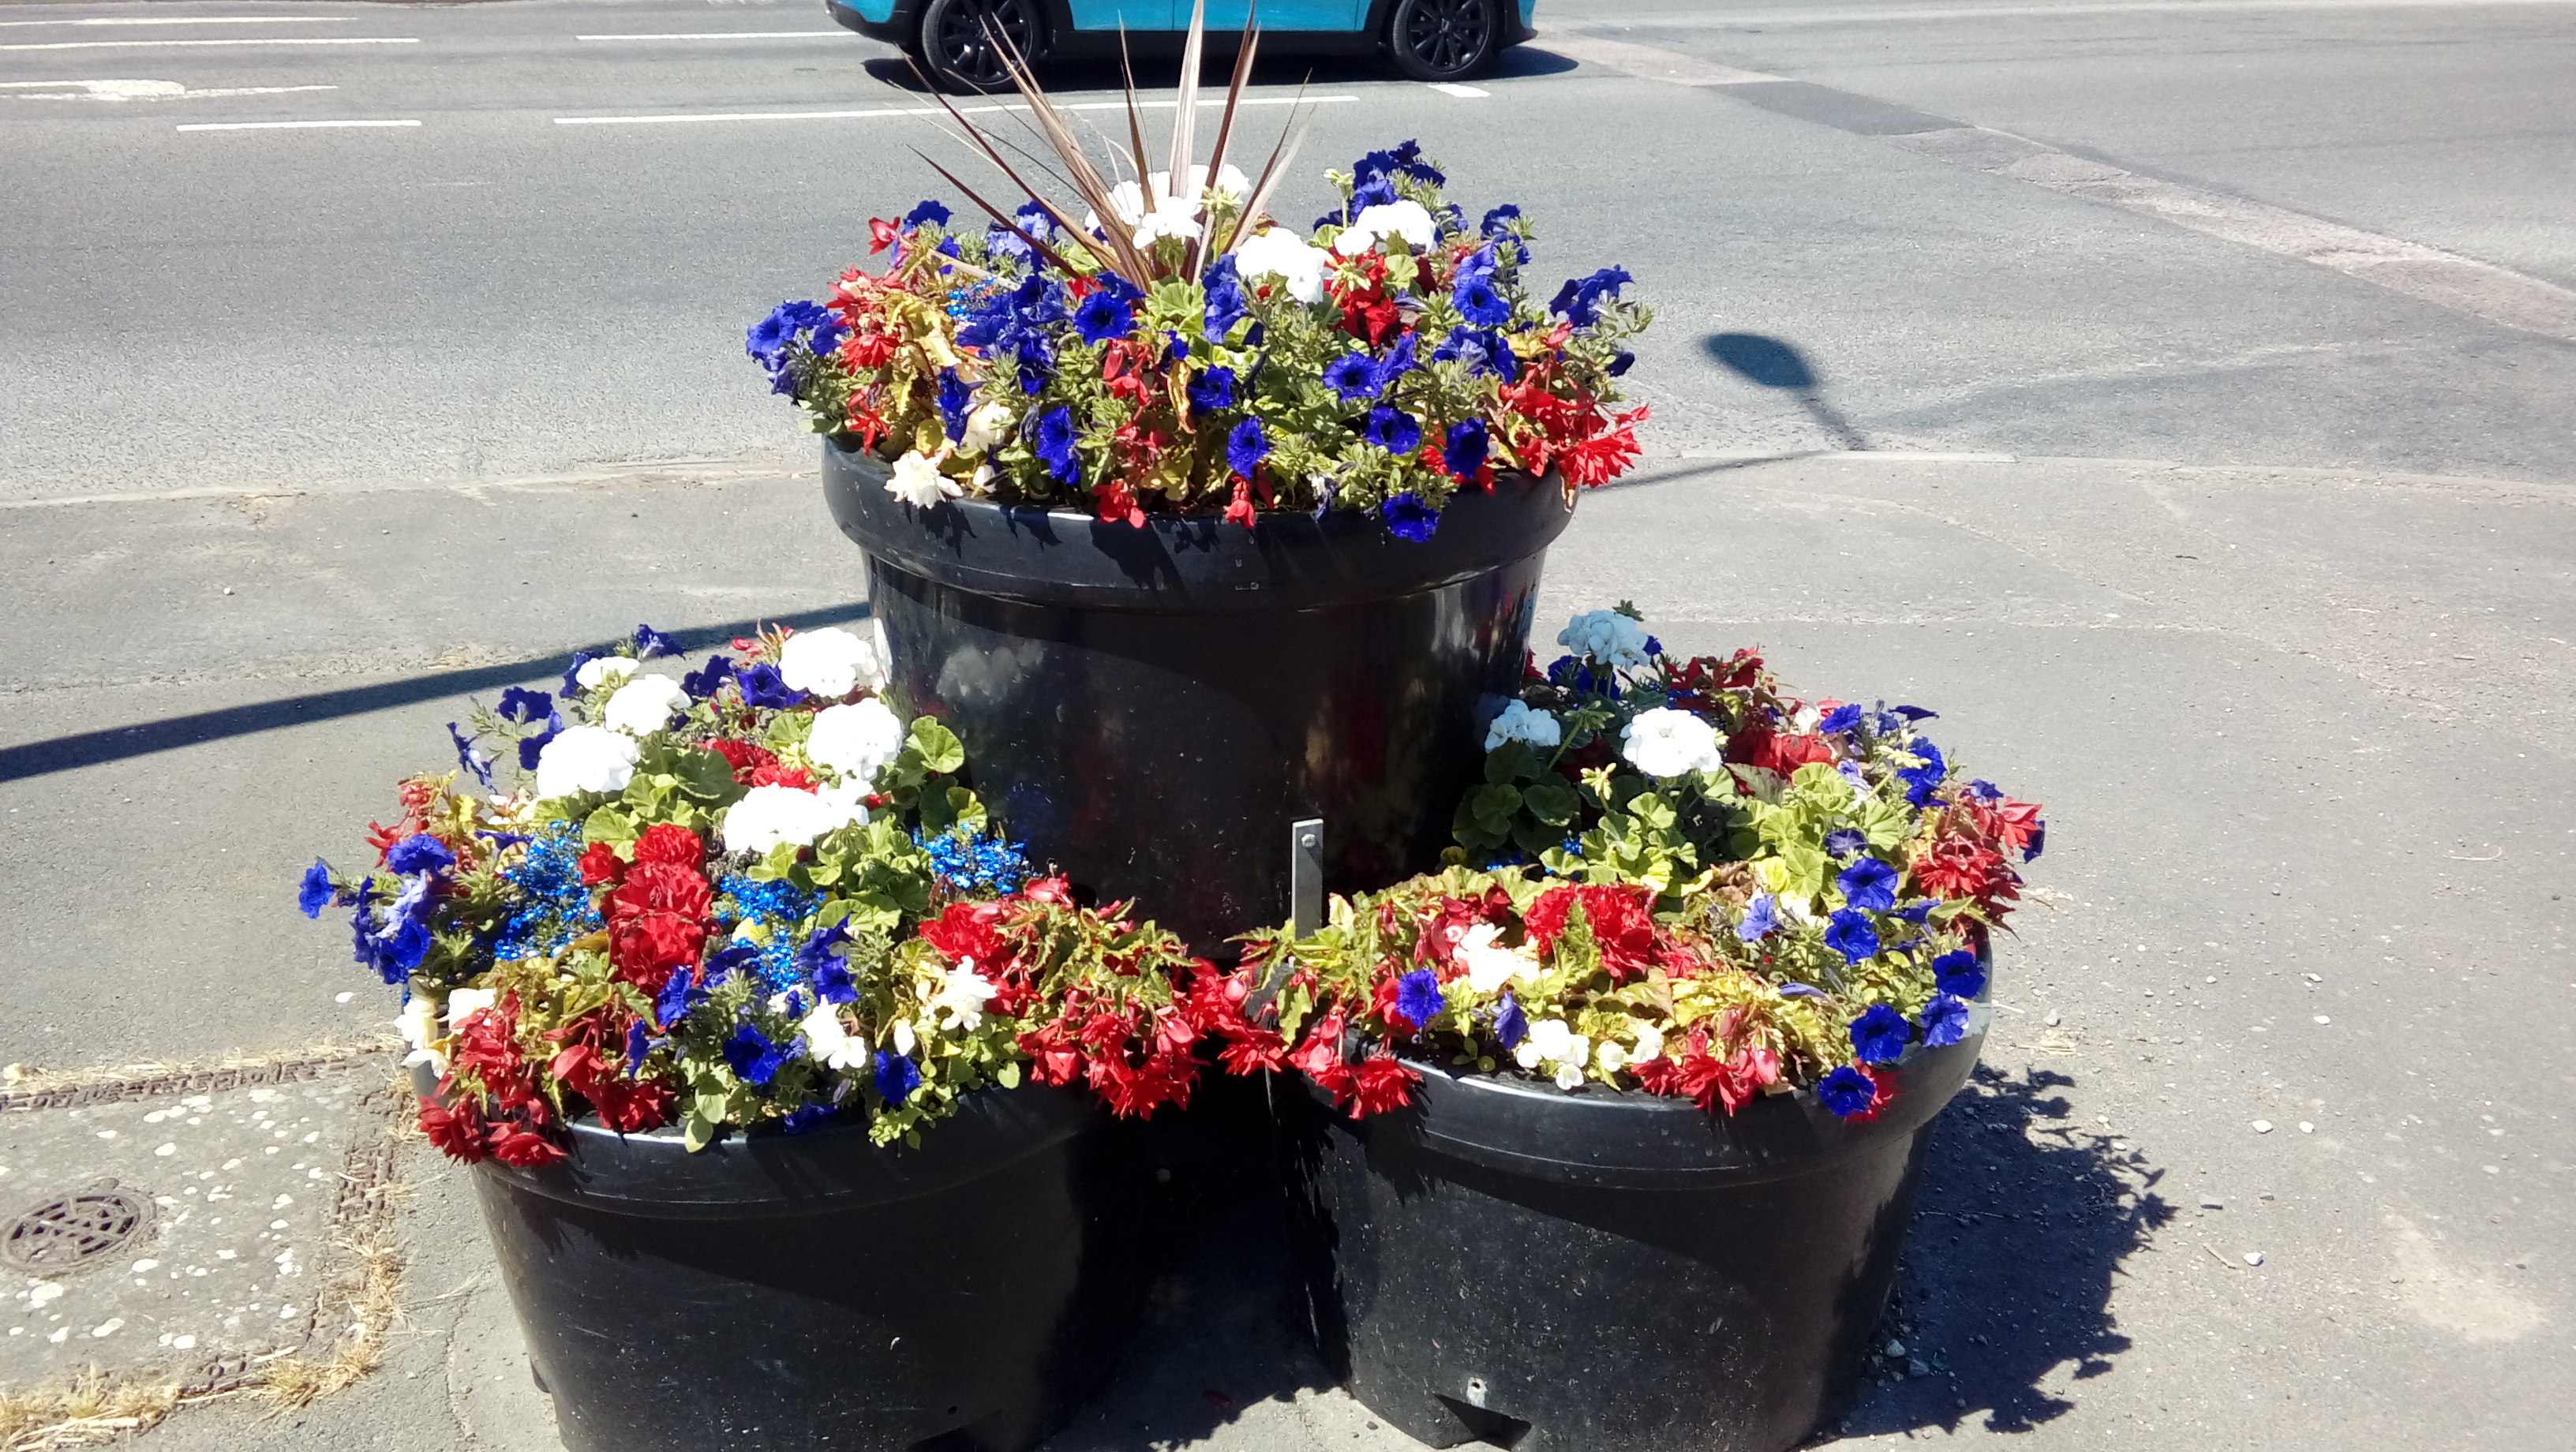 3 baskets of red blue and white flowers